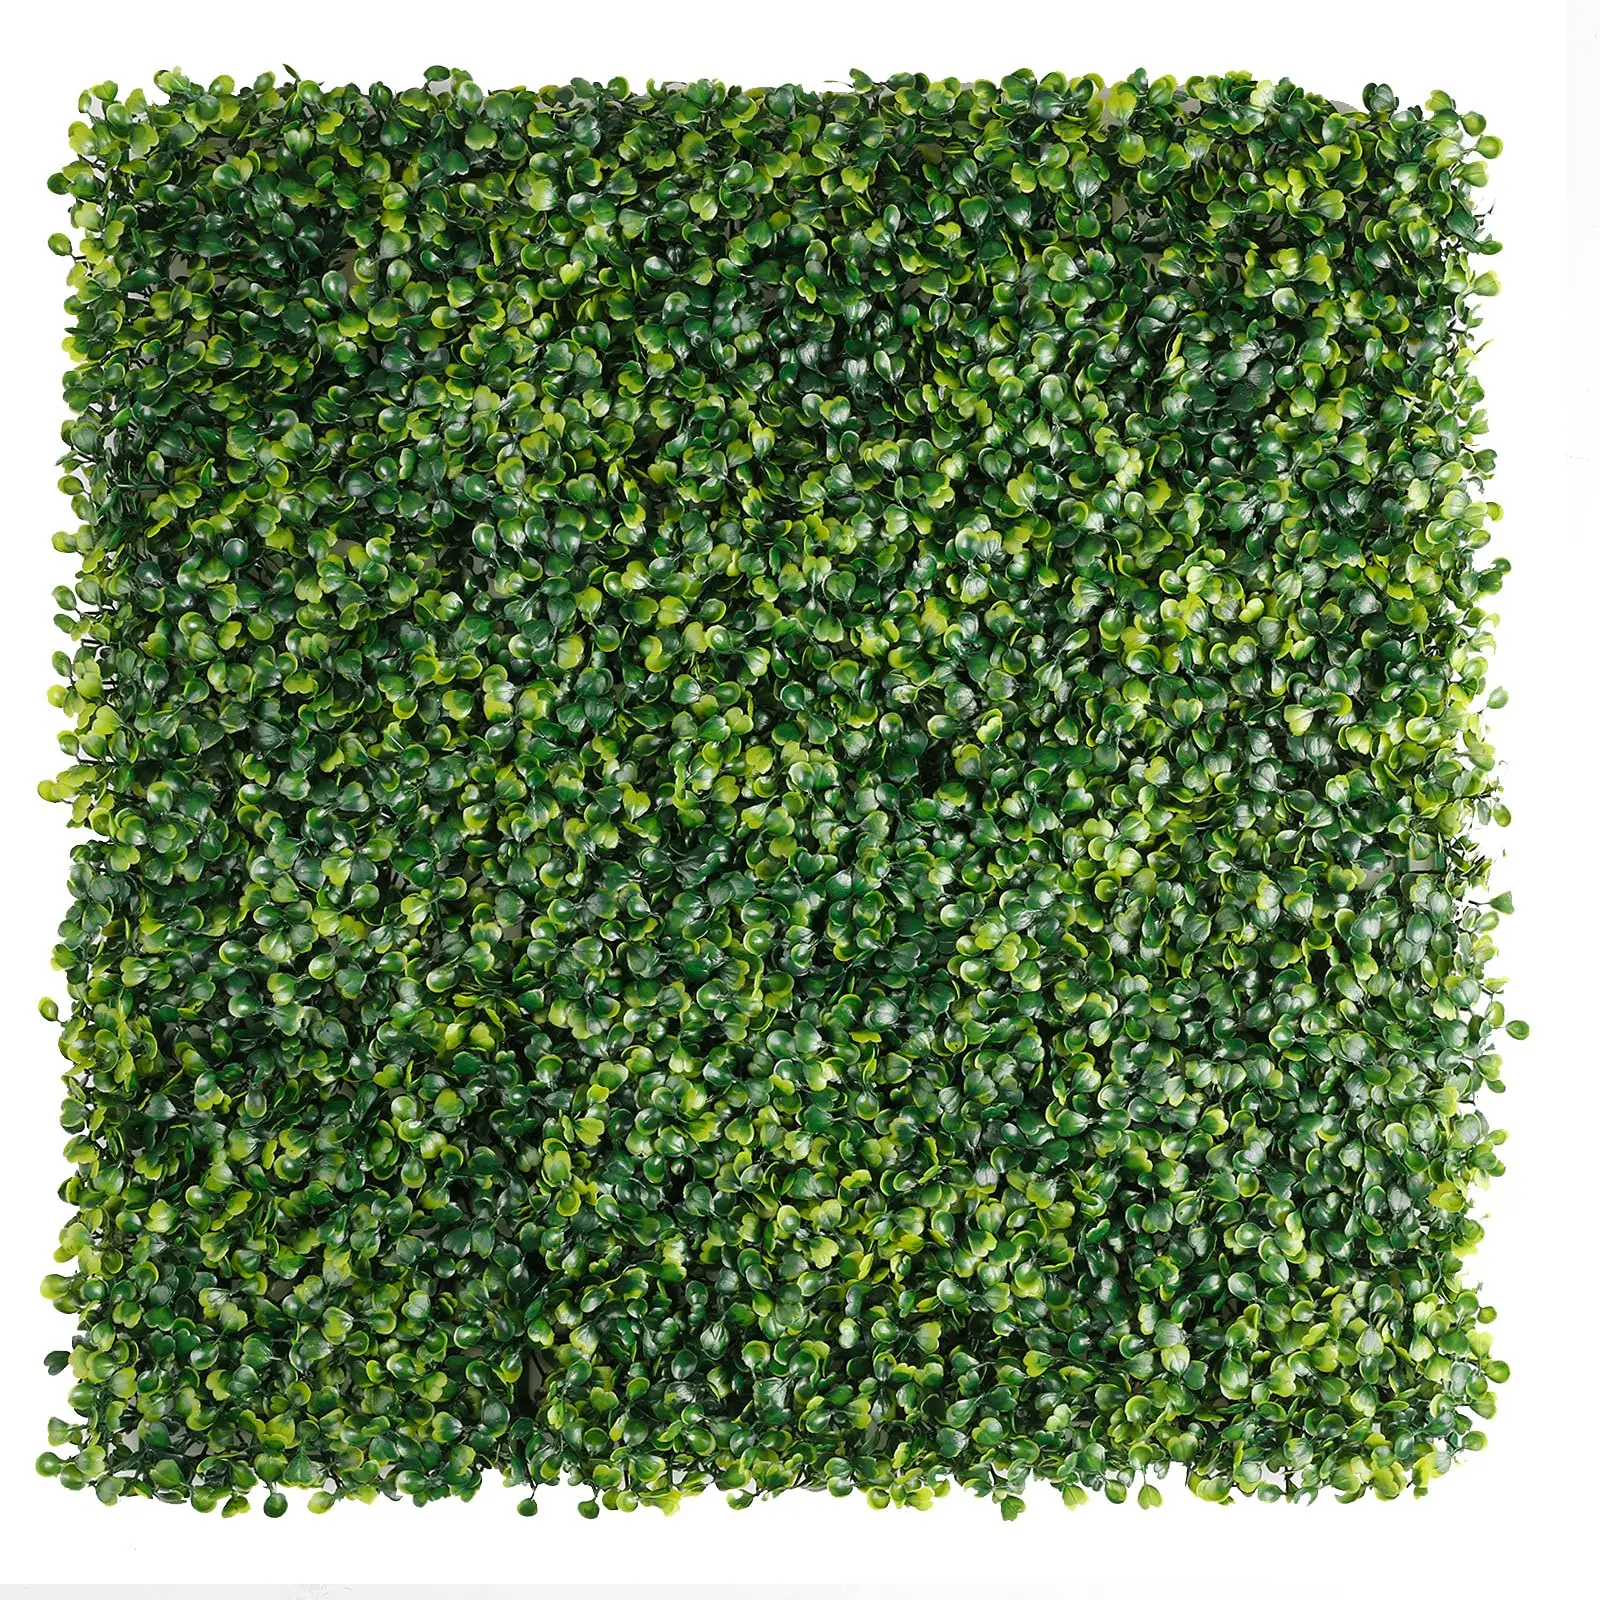 

Anti-uv Plastic High Quality Artificial Hedge Boxwood Panels Green Plant Vertical Garden Wall For Indoor Outdoor Decoration, Customized